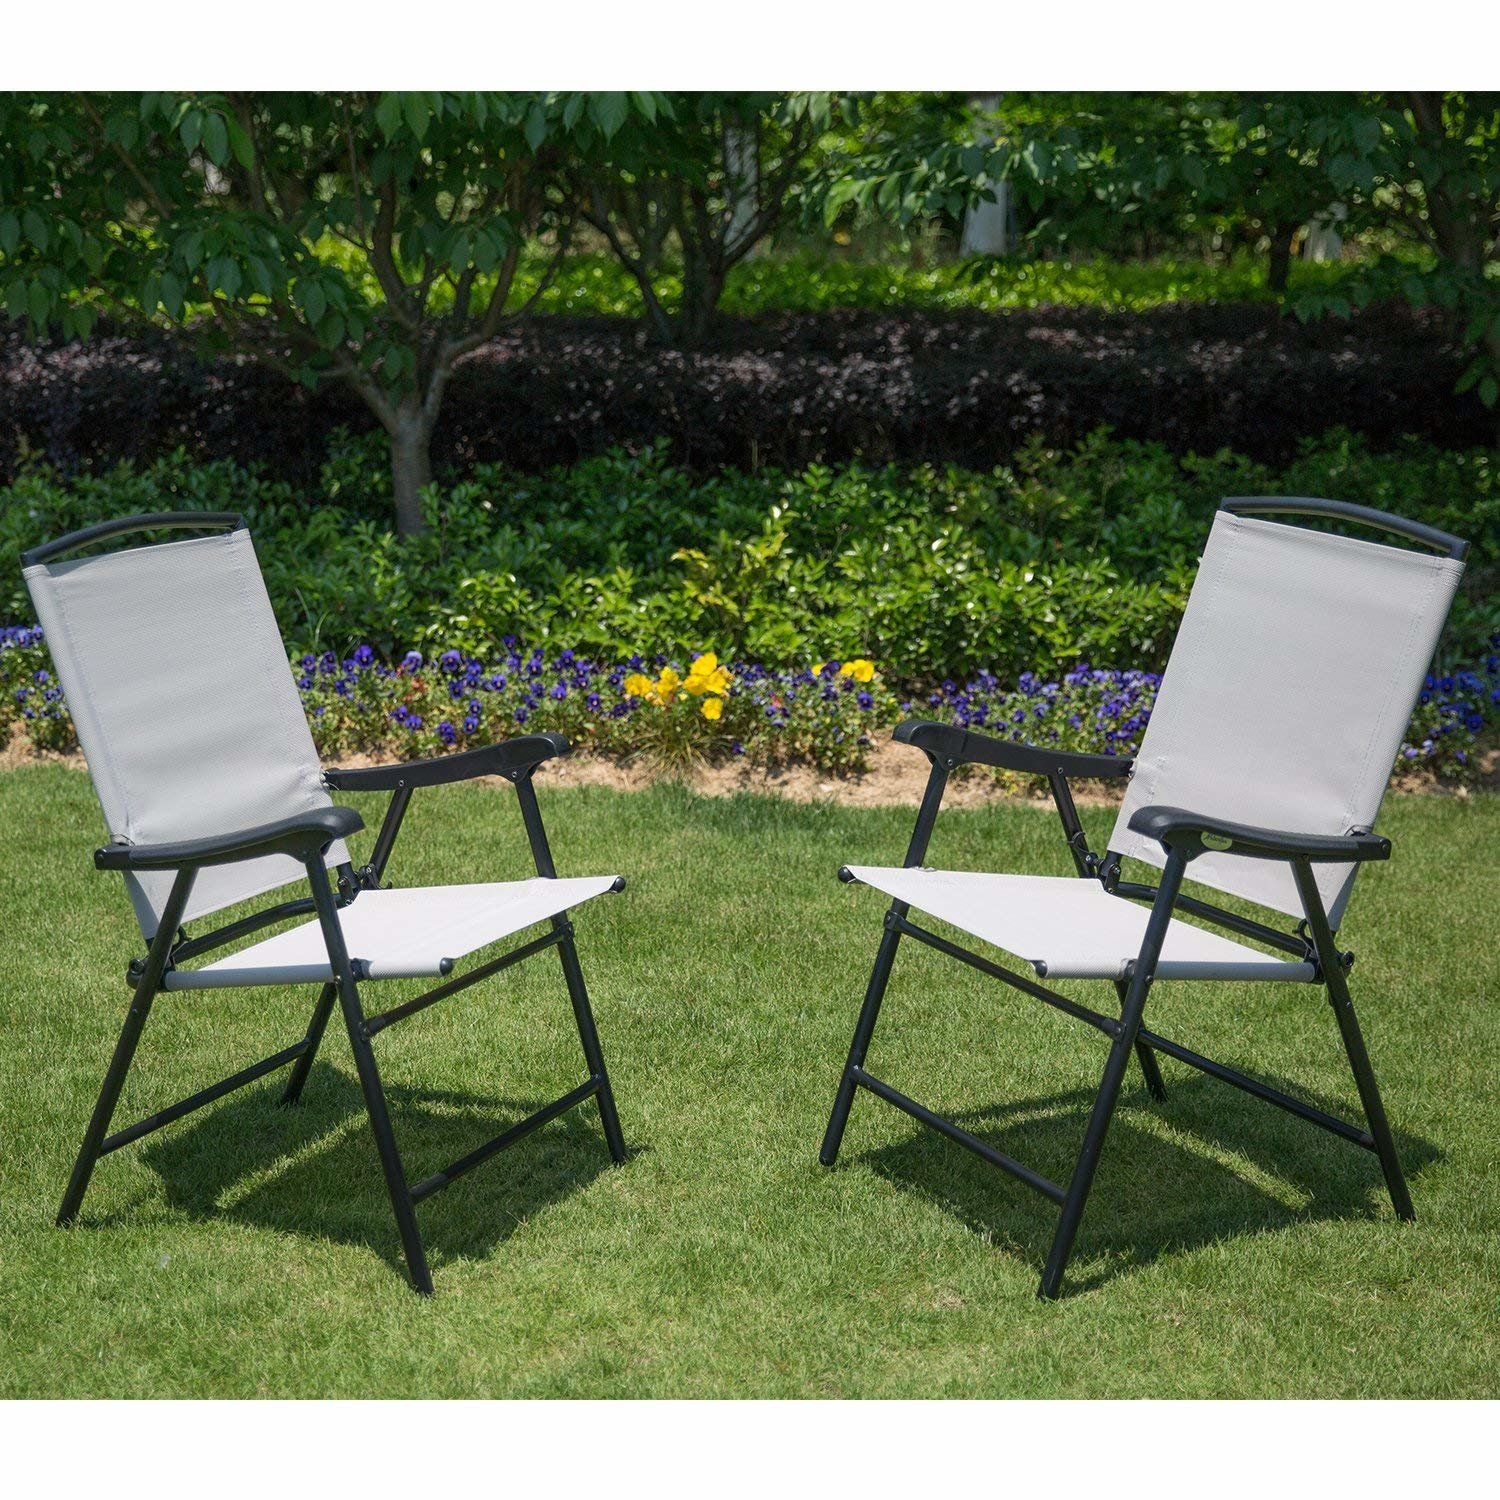 Details About Folding Patio Chair Set Of 2 Lawn Deck Chairs Metal Beige Fabric 300 Lb Capacity inside dimensions 1500 X 1500